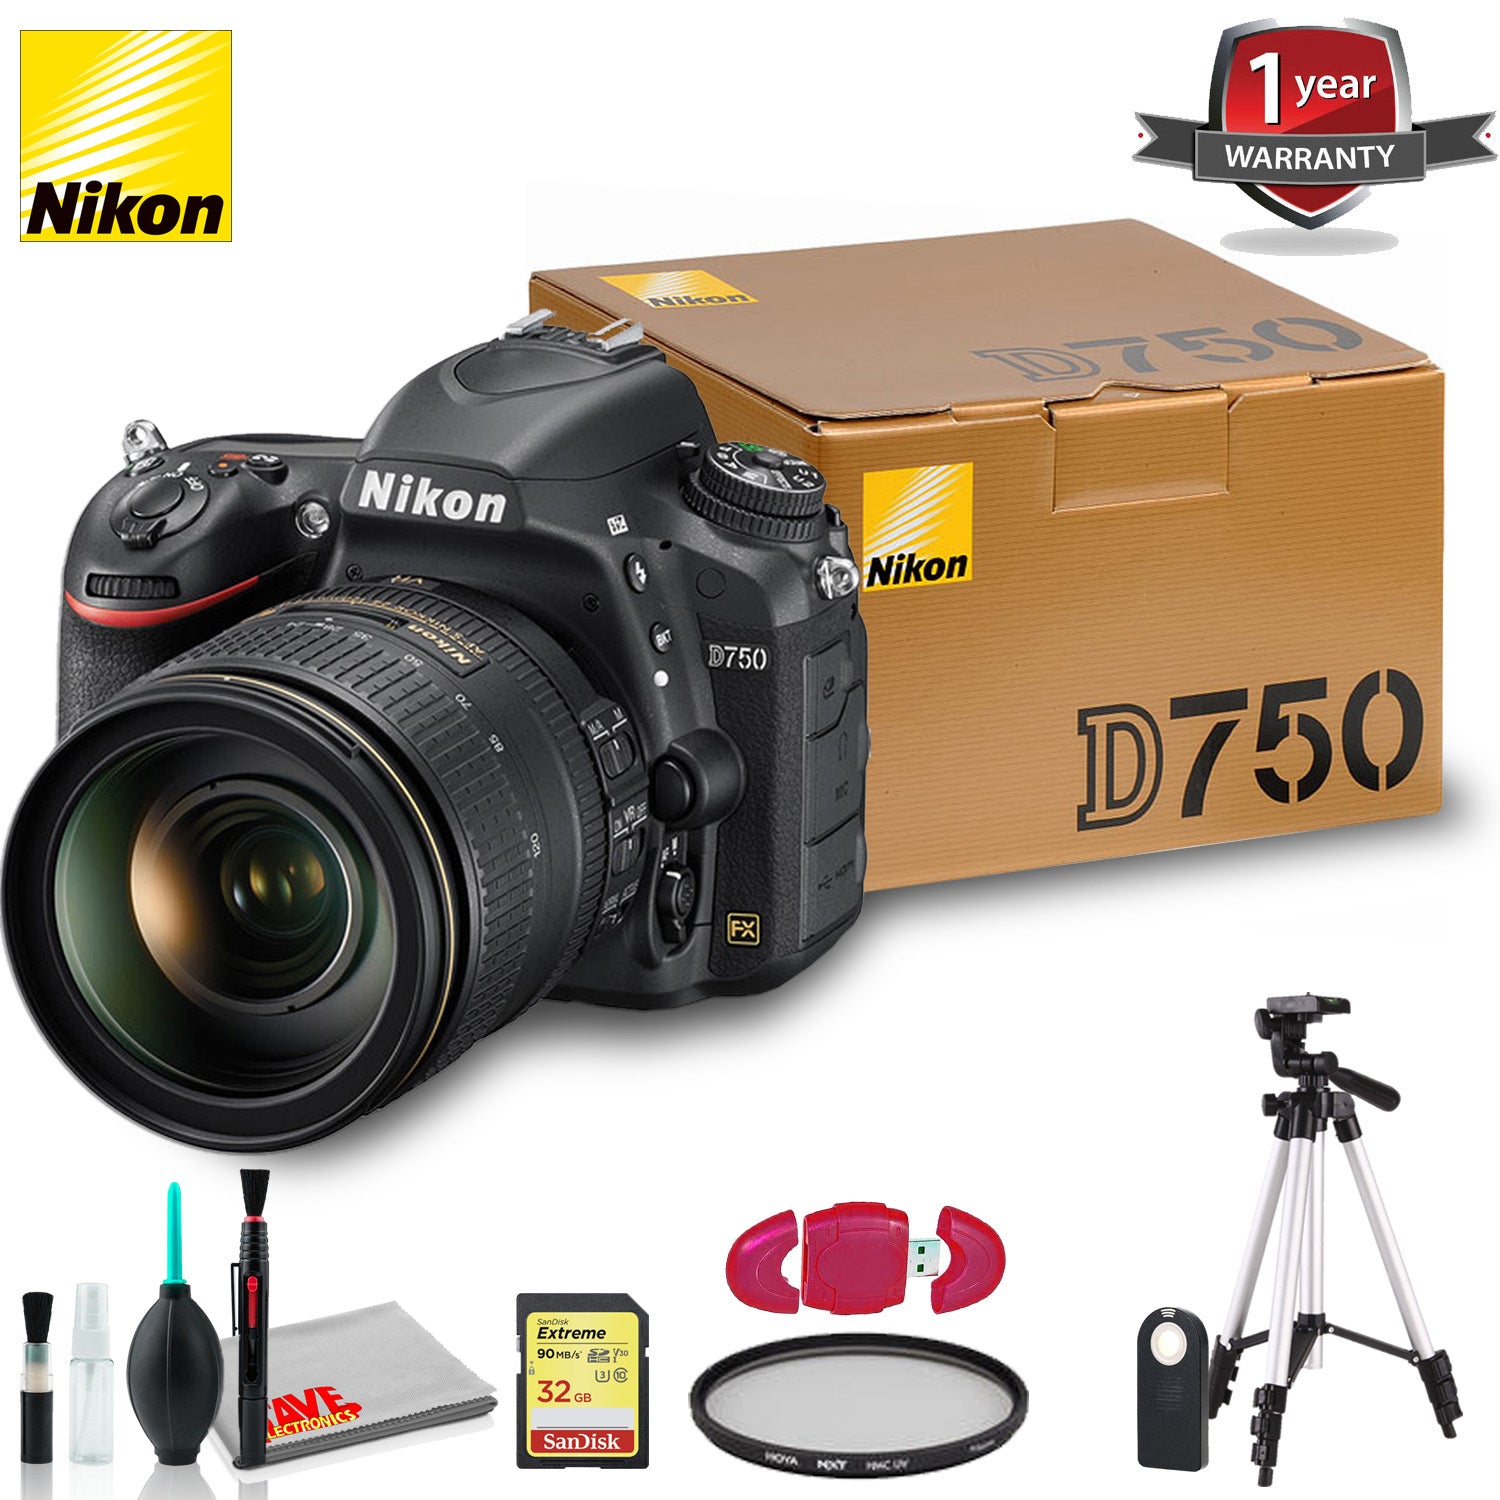 Nikon D750 DSLR Camera with 24-120mm Lens + 1 Year Extended Warranty, USB SD Card Reader + More